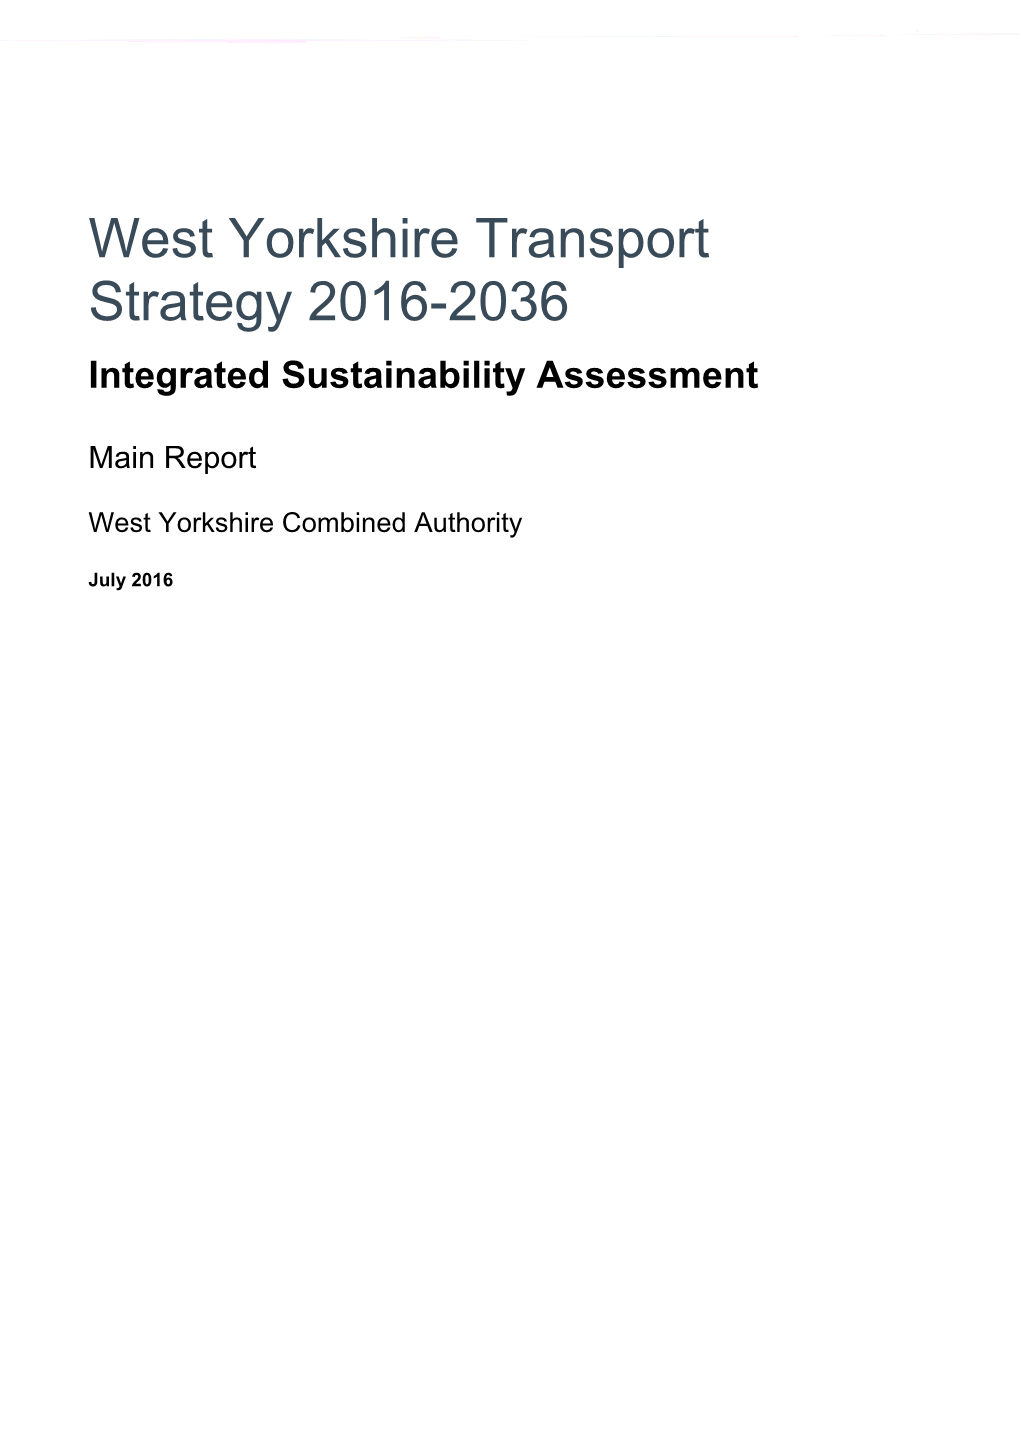 West Yorkshire Transport Strategy 2016-2036